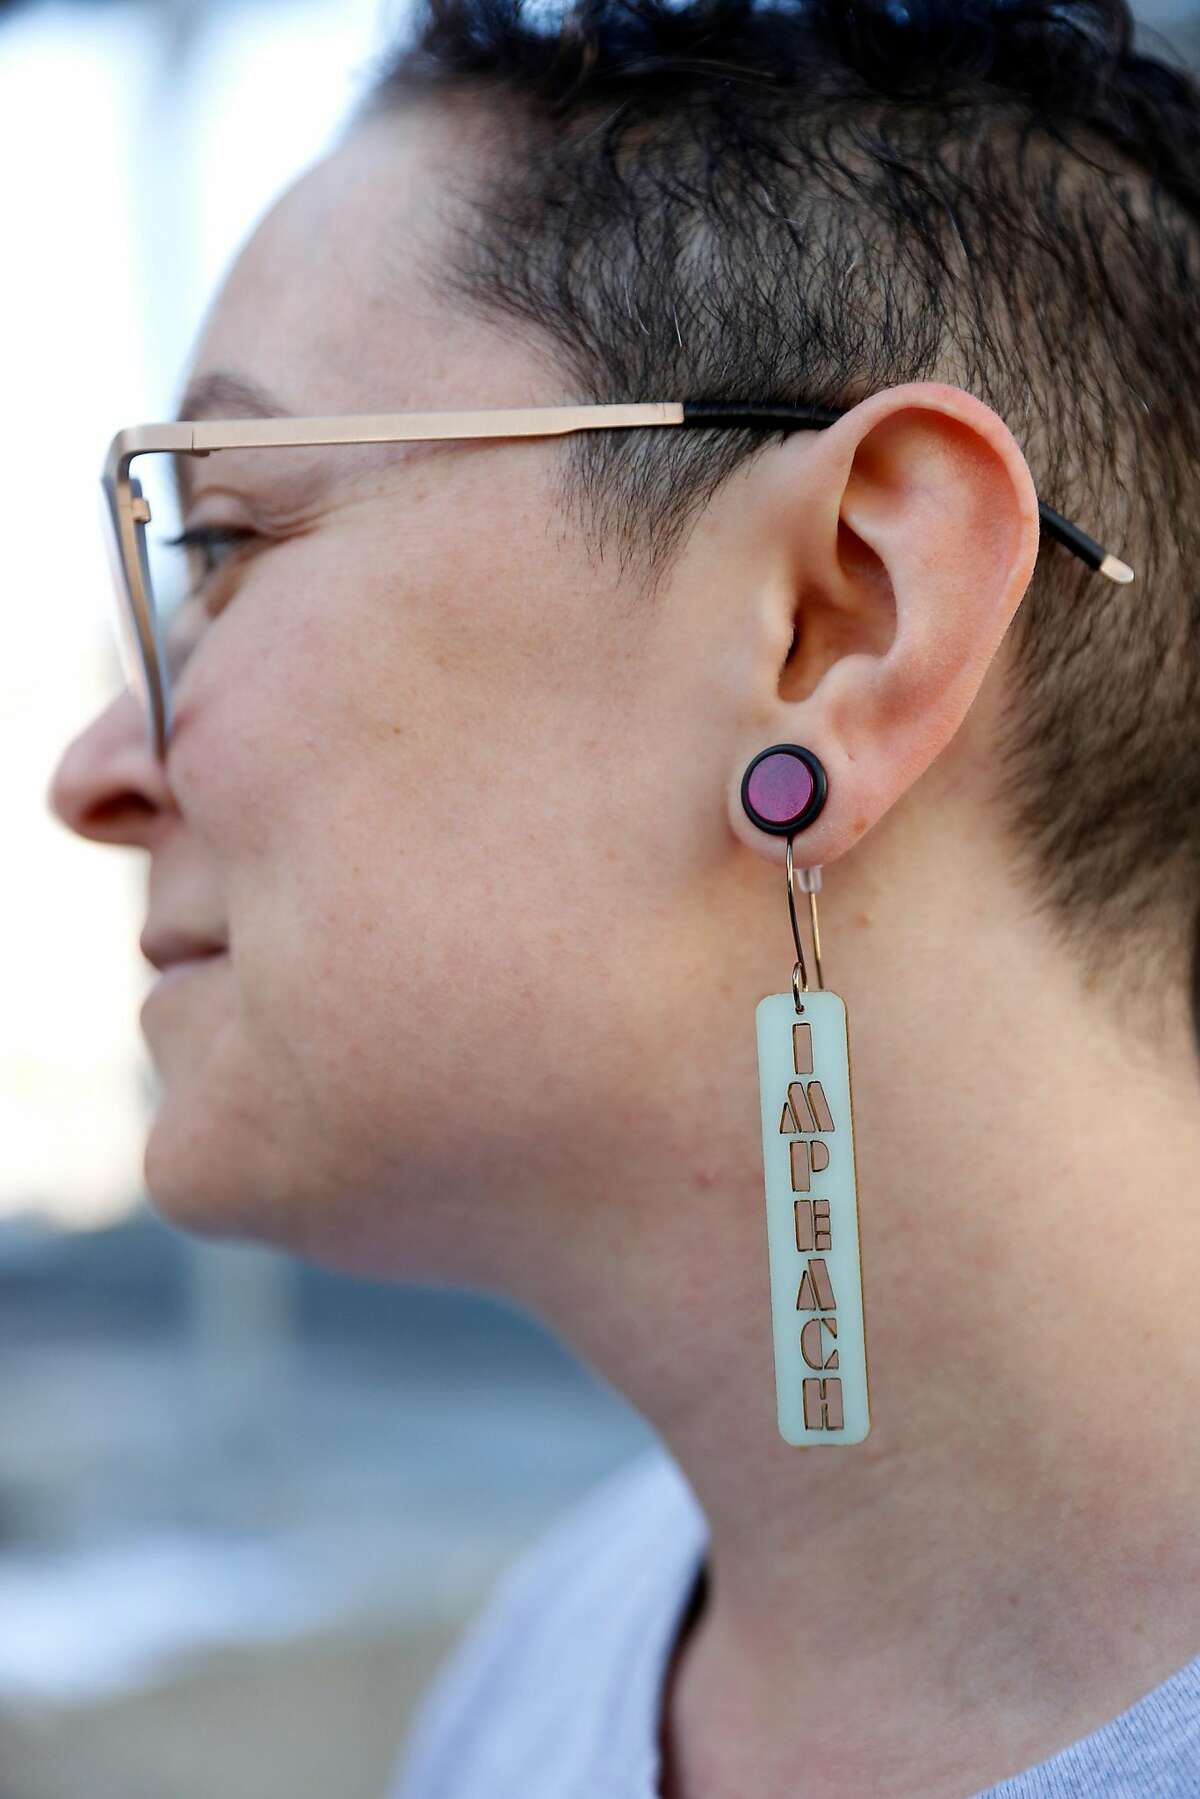 By the People's Mara Schechter wears Impeach earrings as activists hold an Impeach Donald Trump rally at 7th and Mission Streets outside of US Speaker of the House Nacy Pelosi's office in San Francisco, Calif., on Monday, April 22, 2019.